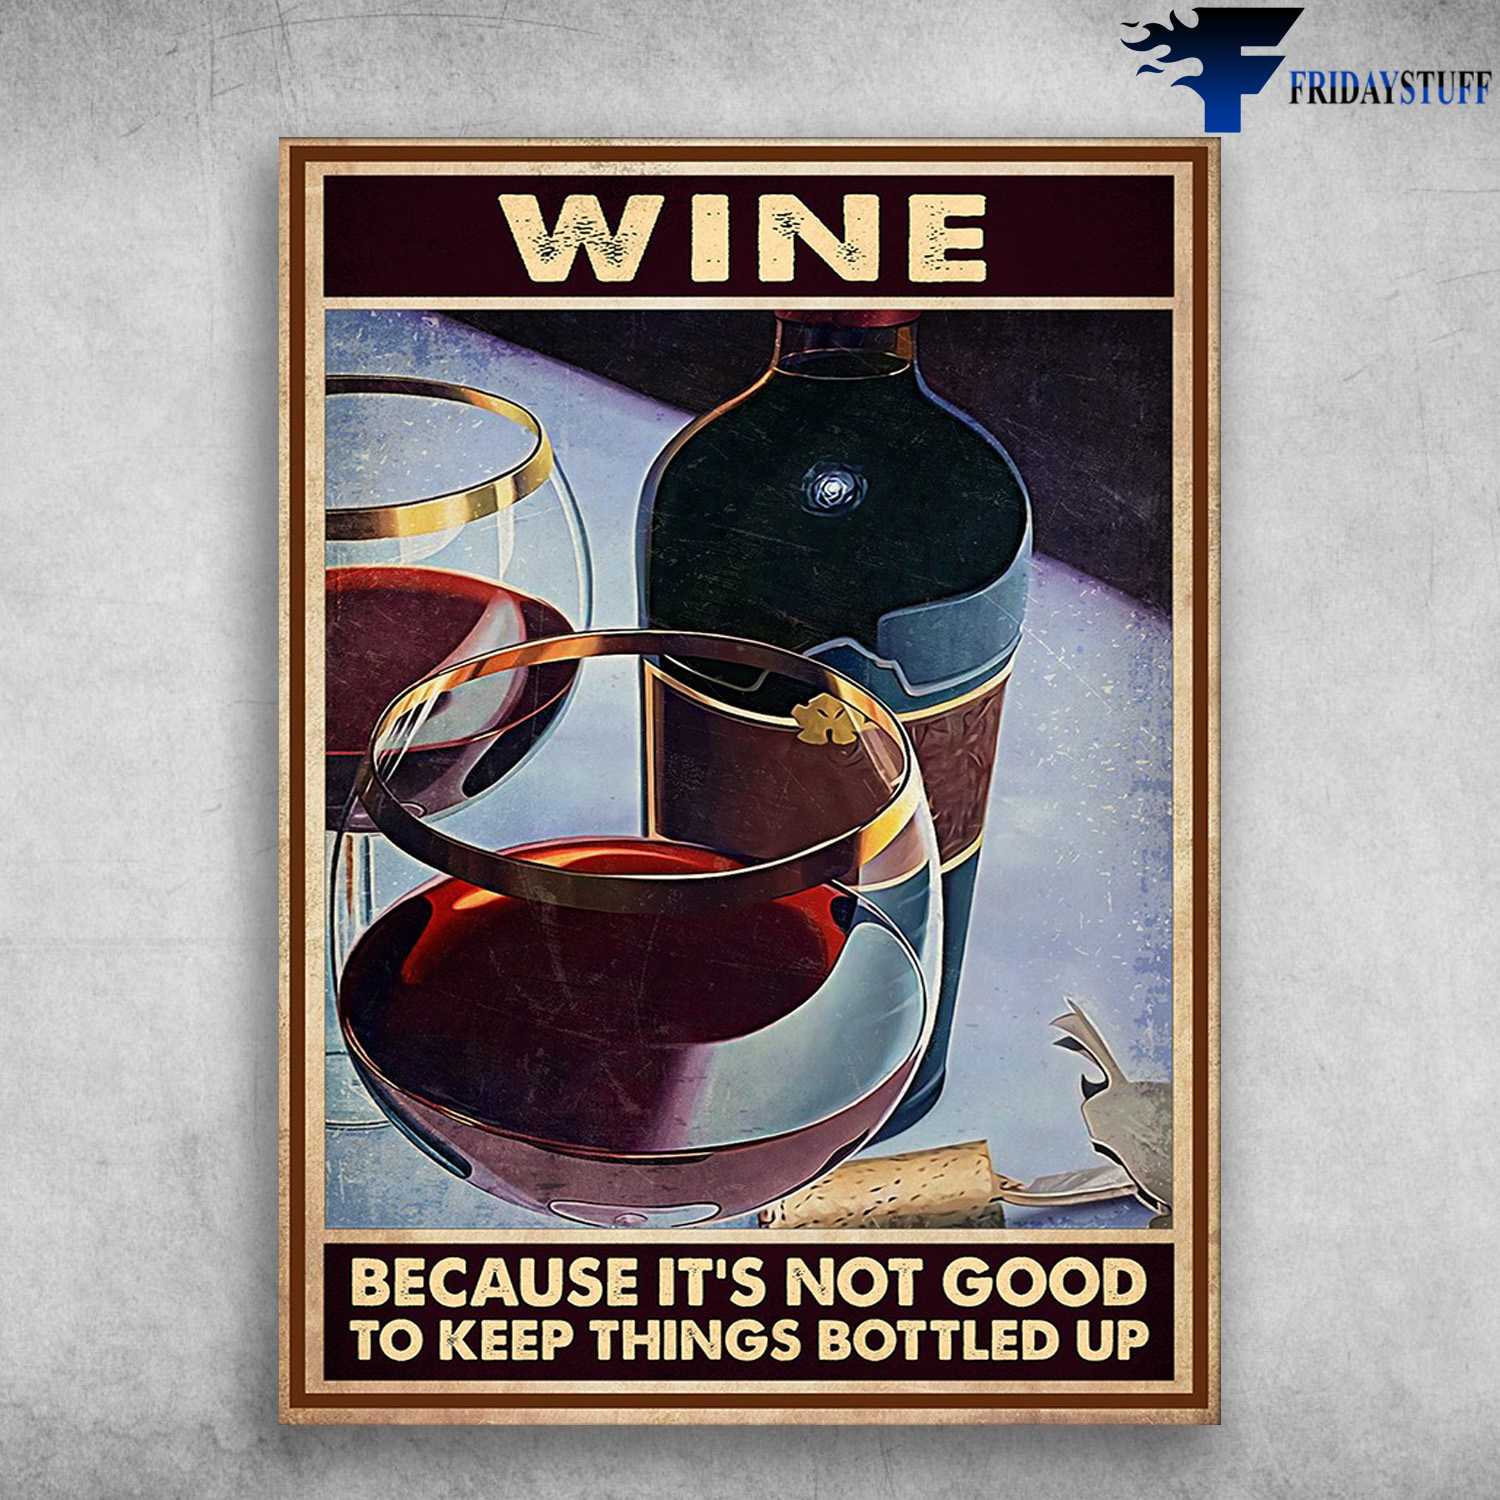 Wine Poster - Wine Because It's Not Good, To Keep Things Bottled Up, Drink Wine